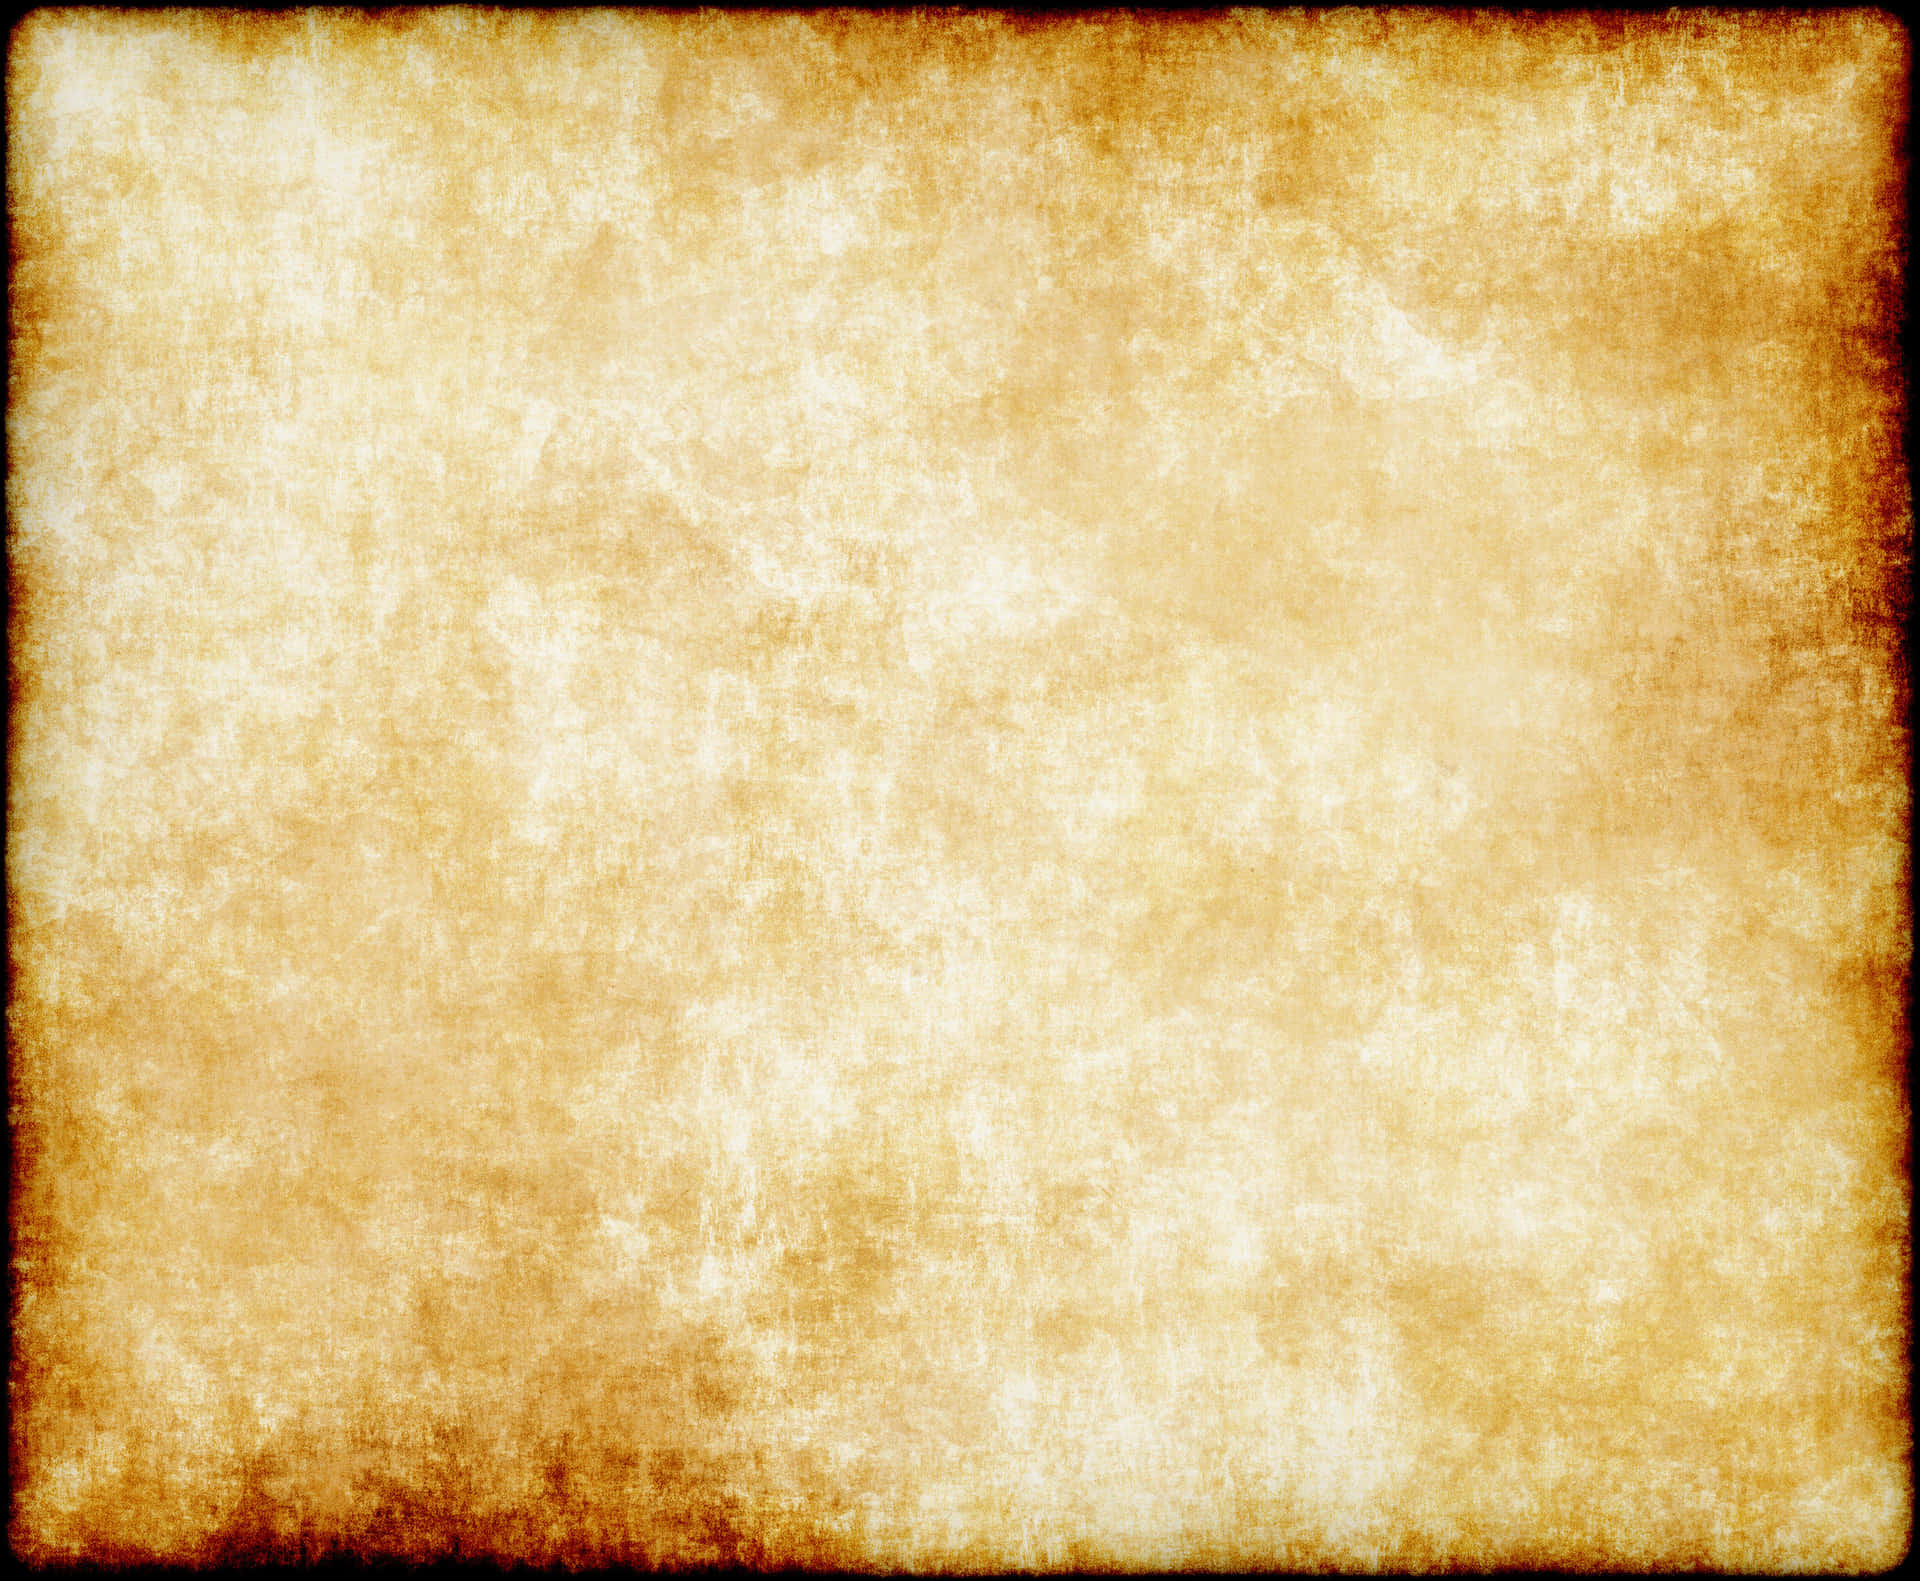 100+] Brown Paper Backgrounds